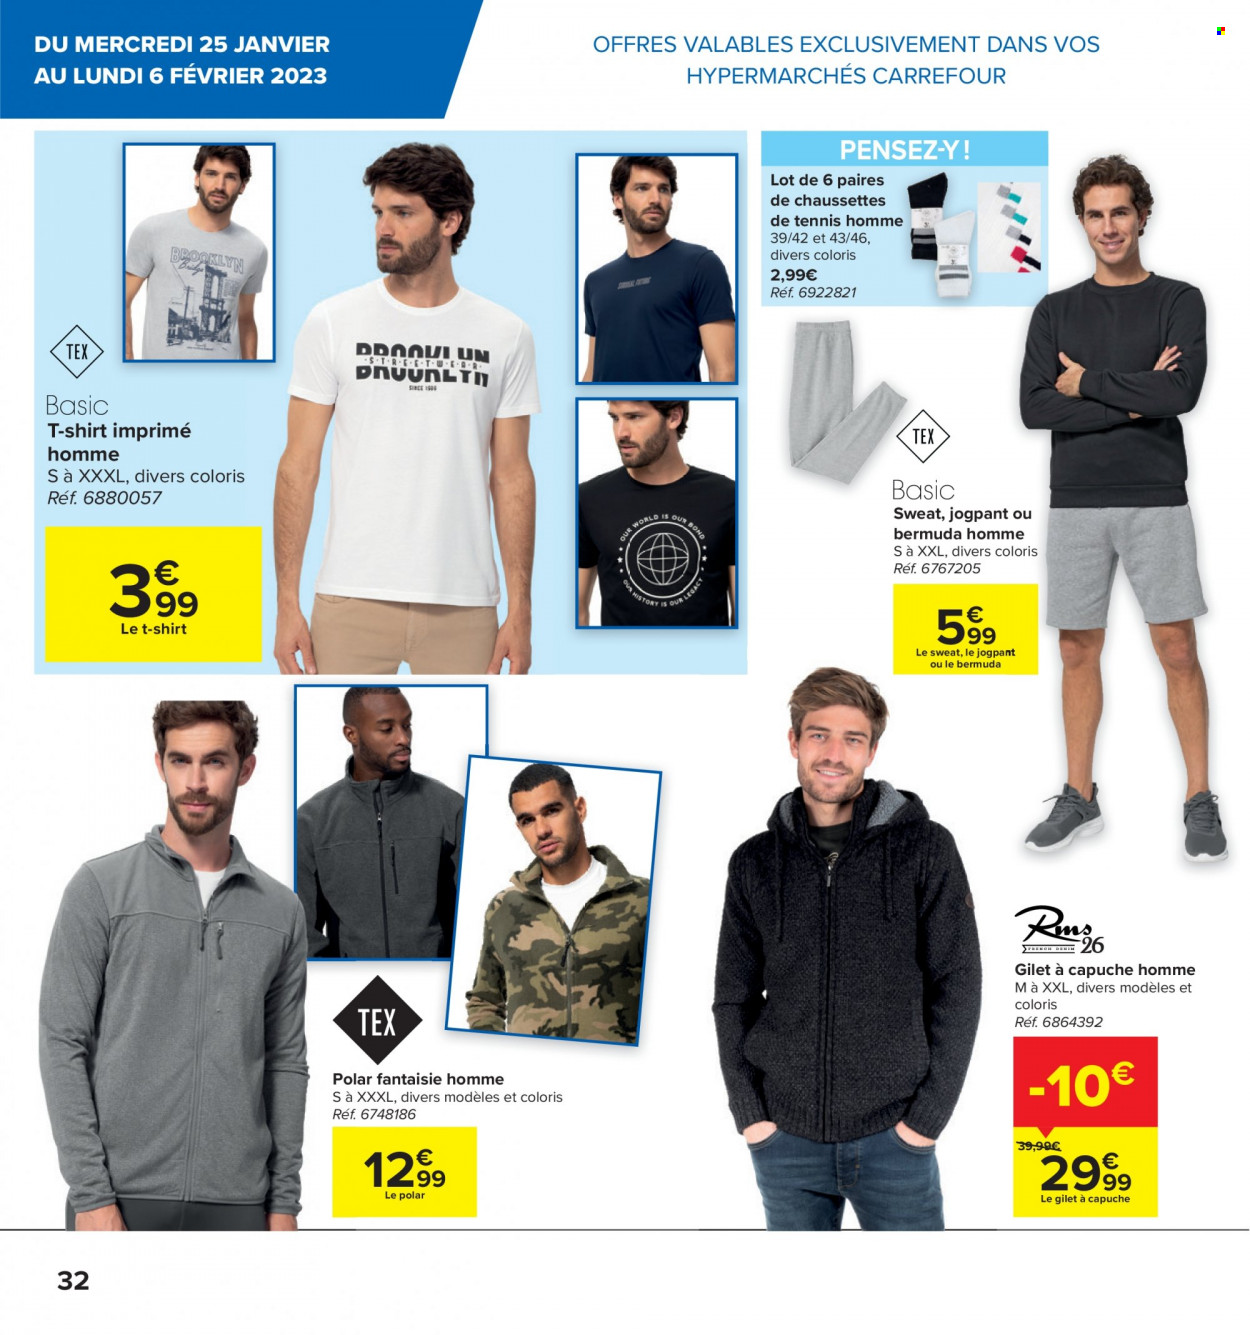 Catalogue Carrefour hypermarkt - 25.1.2023 - 6.2.2023. Page 12.